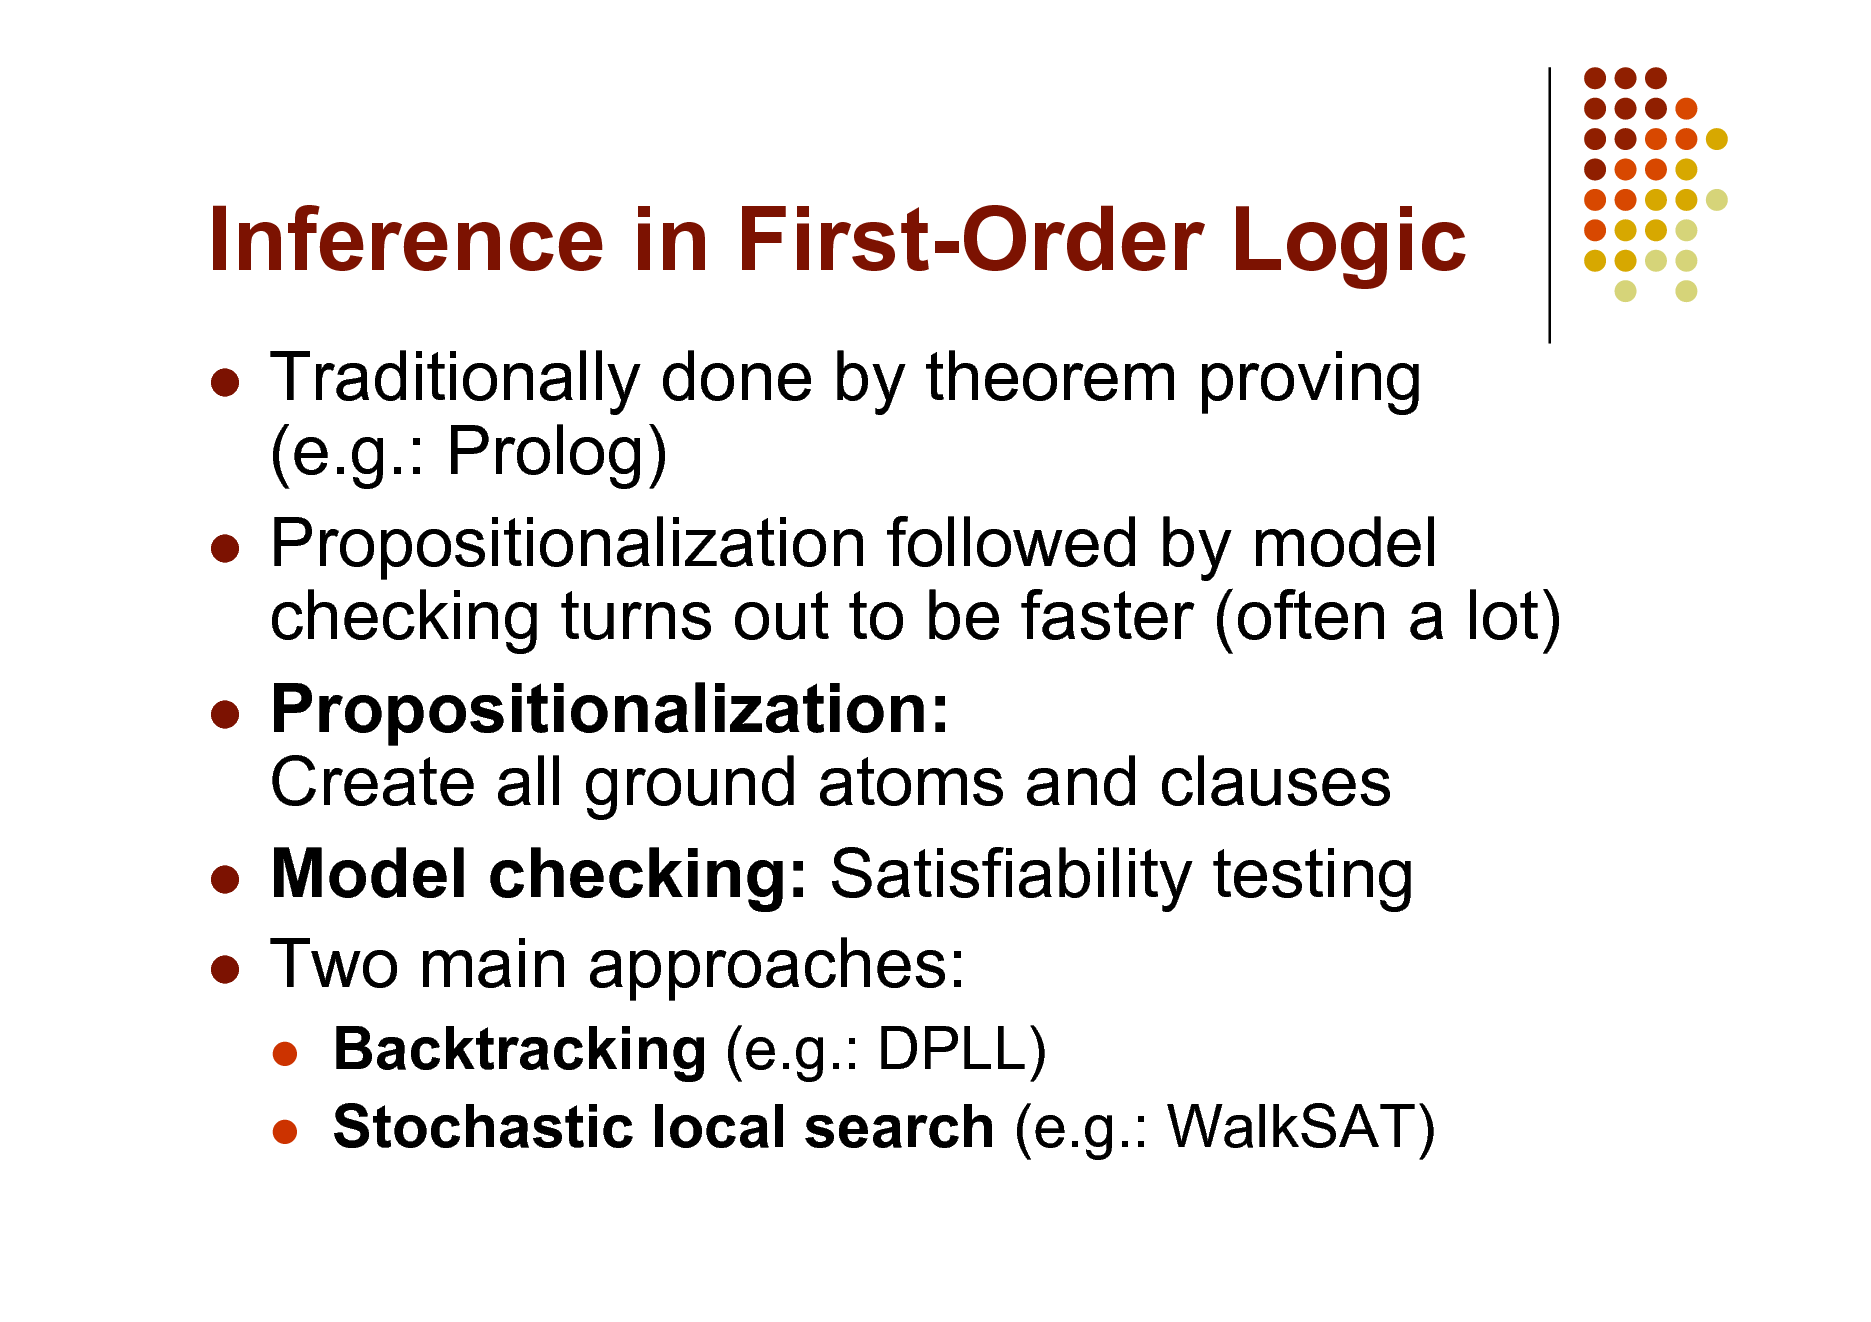 Slide: Inference in First-Order Logic
Traditionally done by theorem proving (e.g.: Prolog)  Propositionalization followed by model checking turns out to be faster (often a lot)  Propositionalization: Create all ground atoms and clauses  Model checking: Satisfiability testing  Two main approaches:

 

Backtracking (e.g.: DPLL) Stochastic local search (e.g.: WalkSAT)

